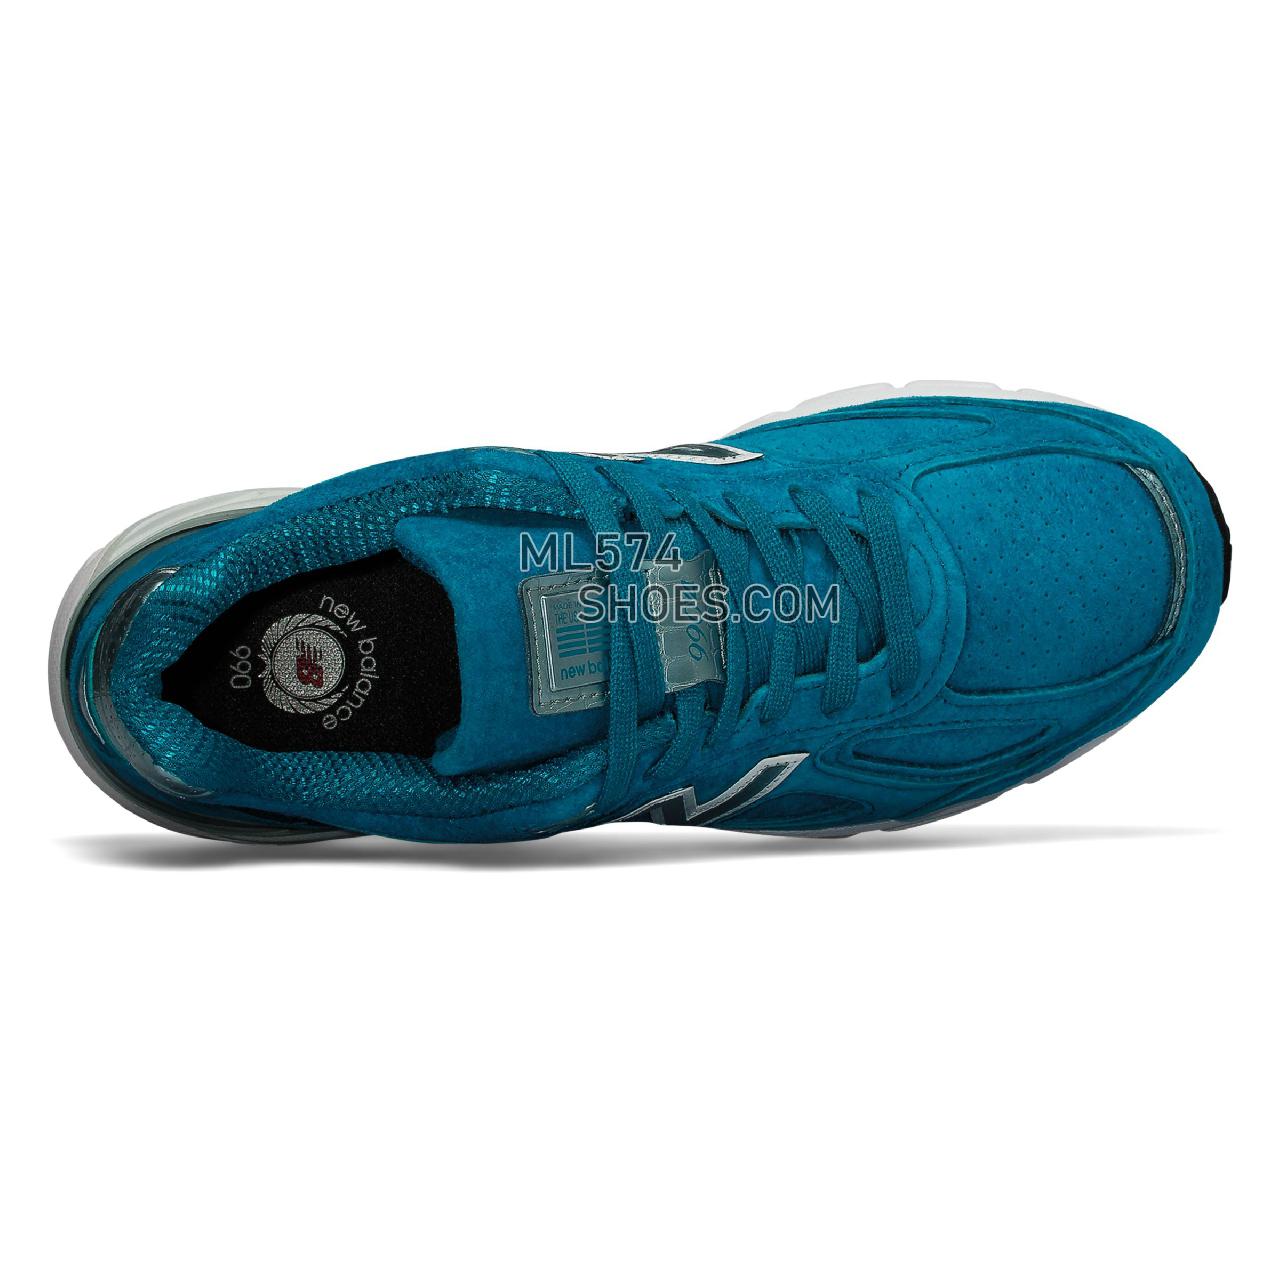 New Balance Womens 990v4 Made in US - Women's 990 - Running Lake Blue with Silver - W990LB4